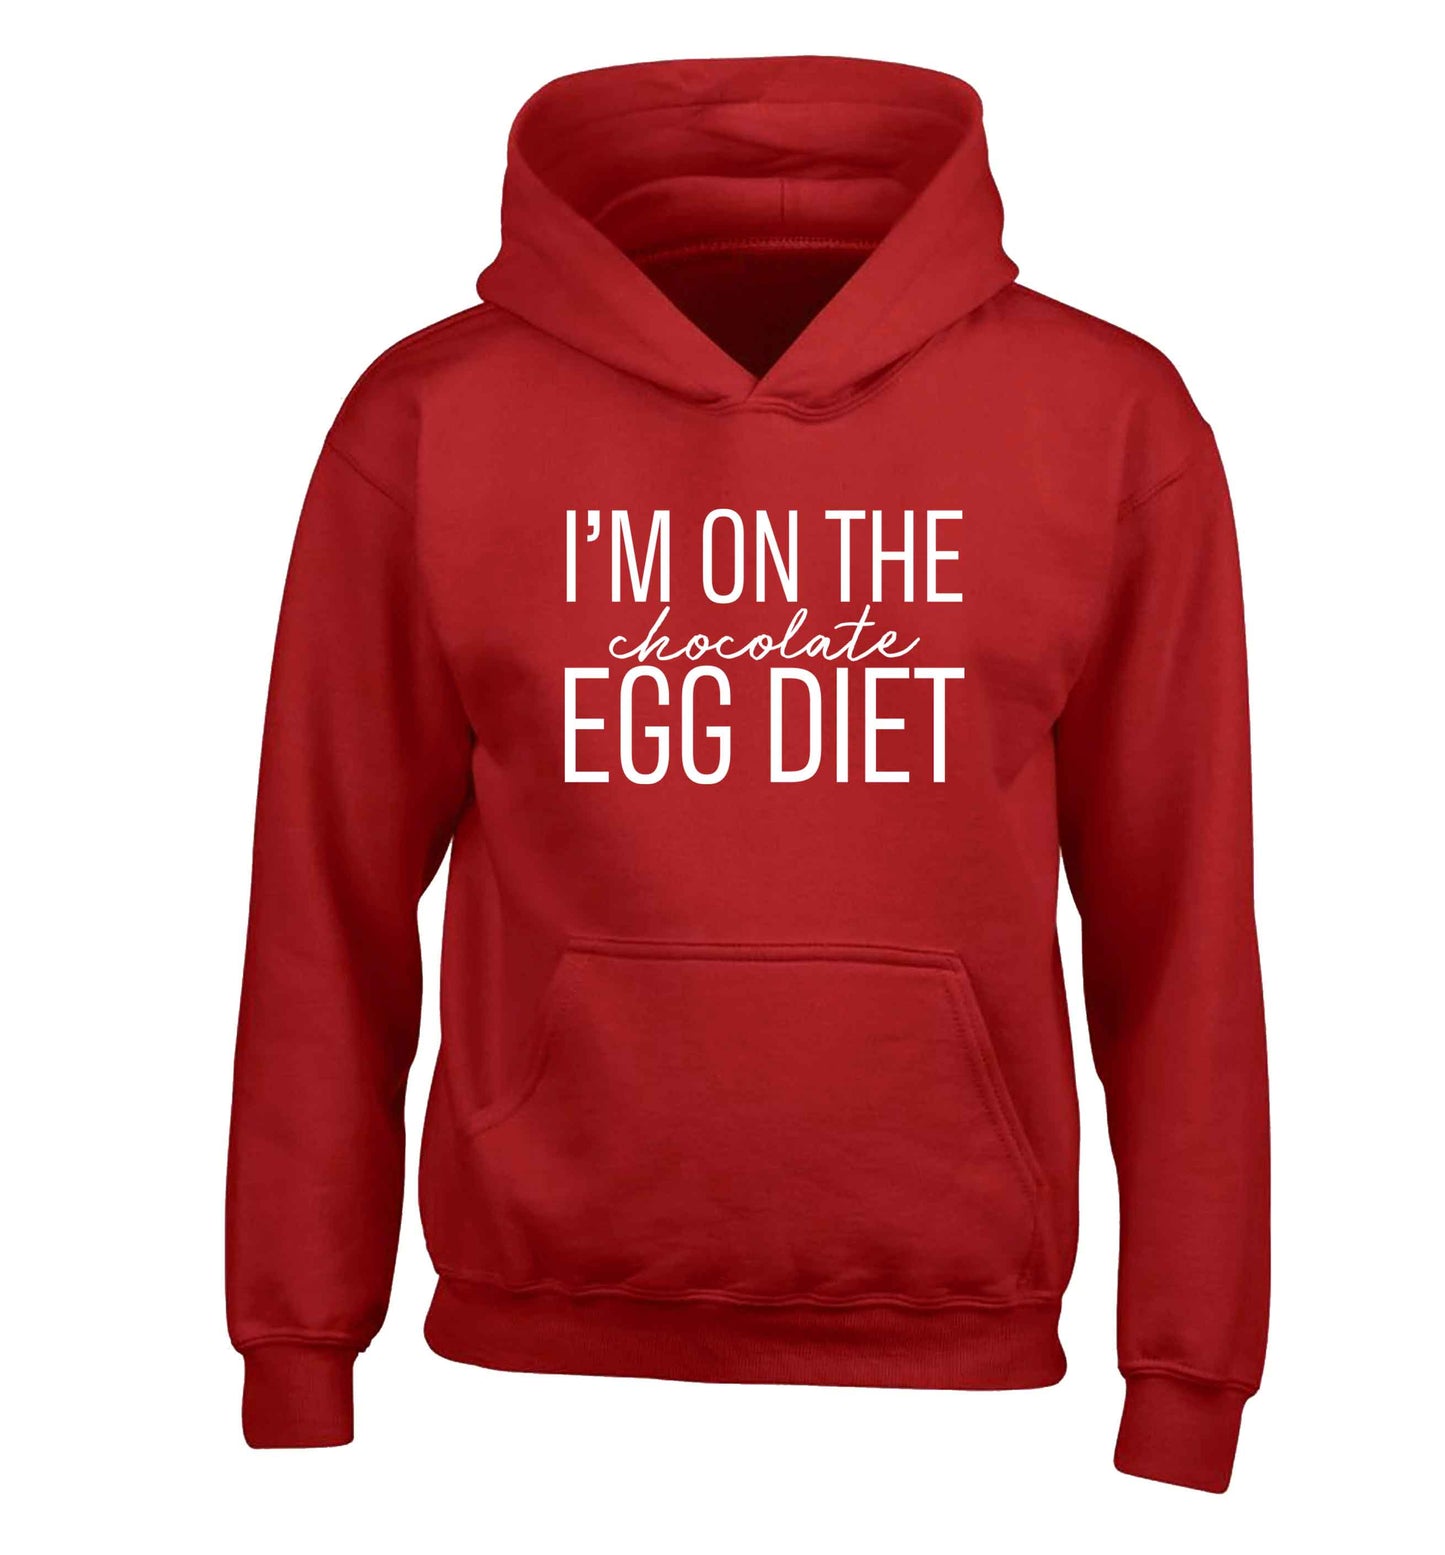 I'm on the chocolate egg diet children's red hoodie 12-13 Years